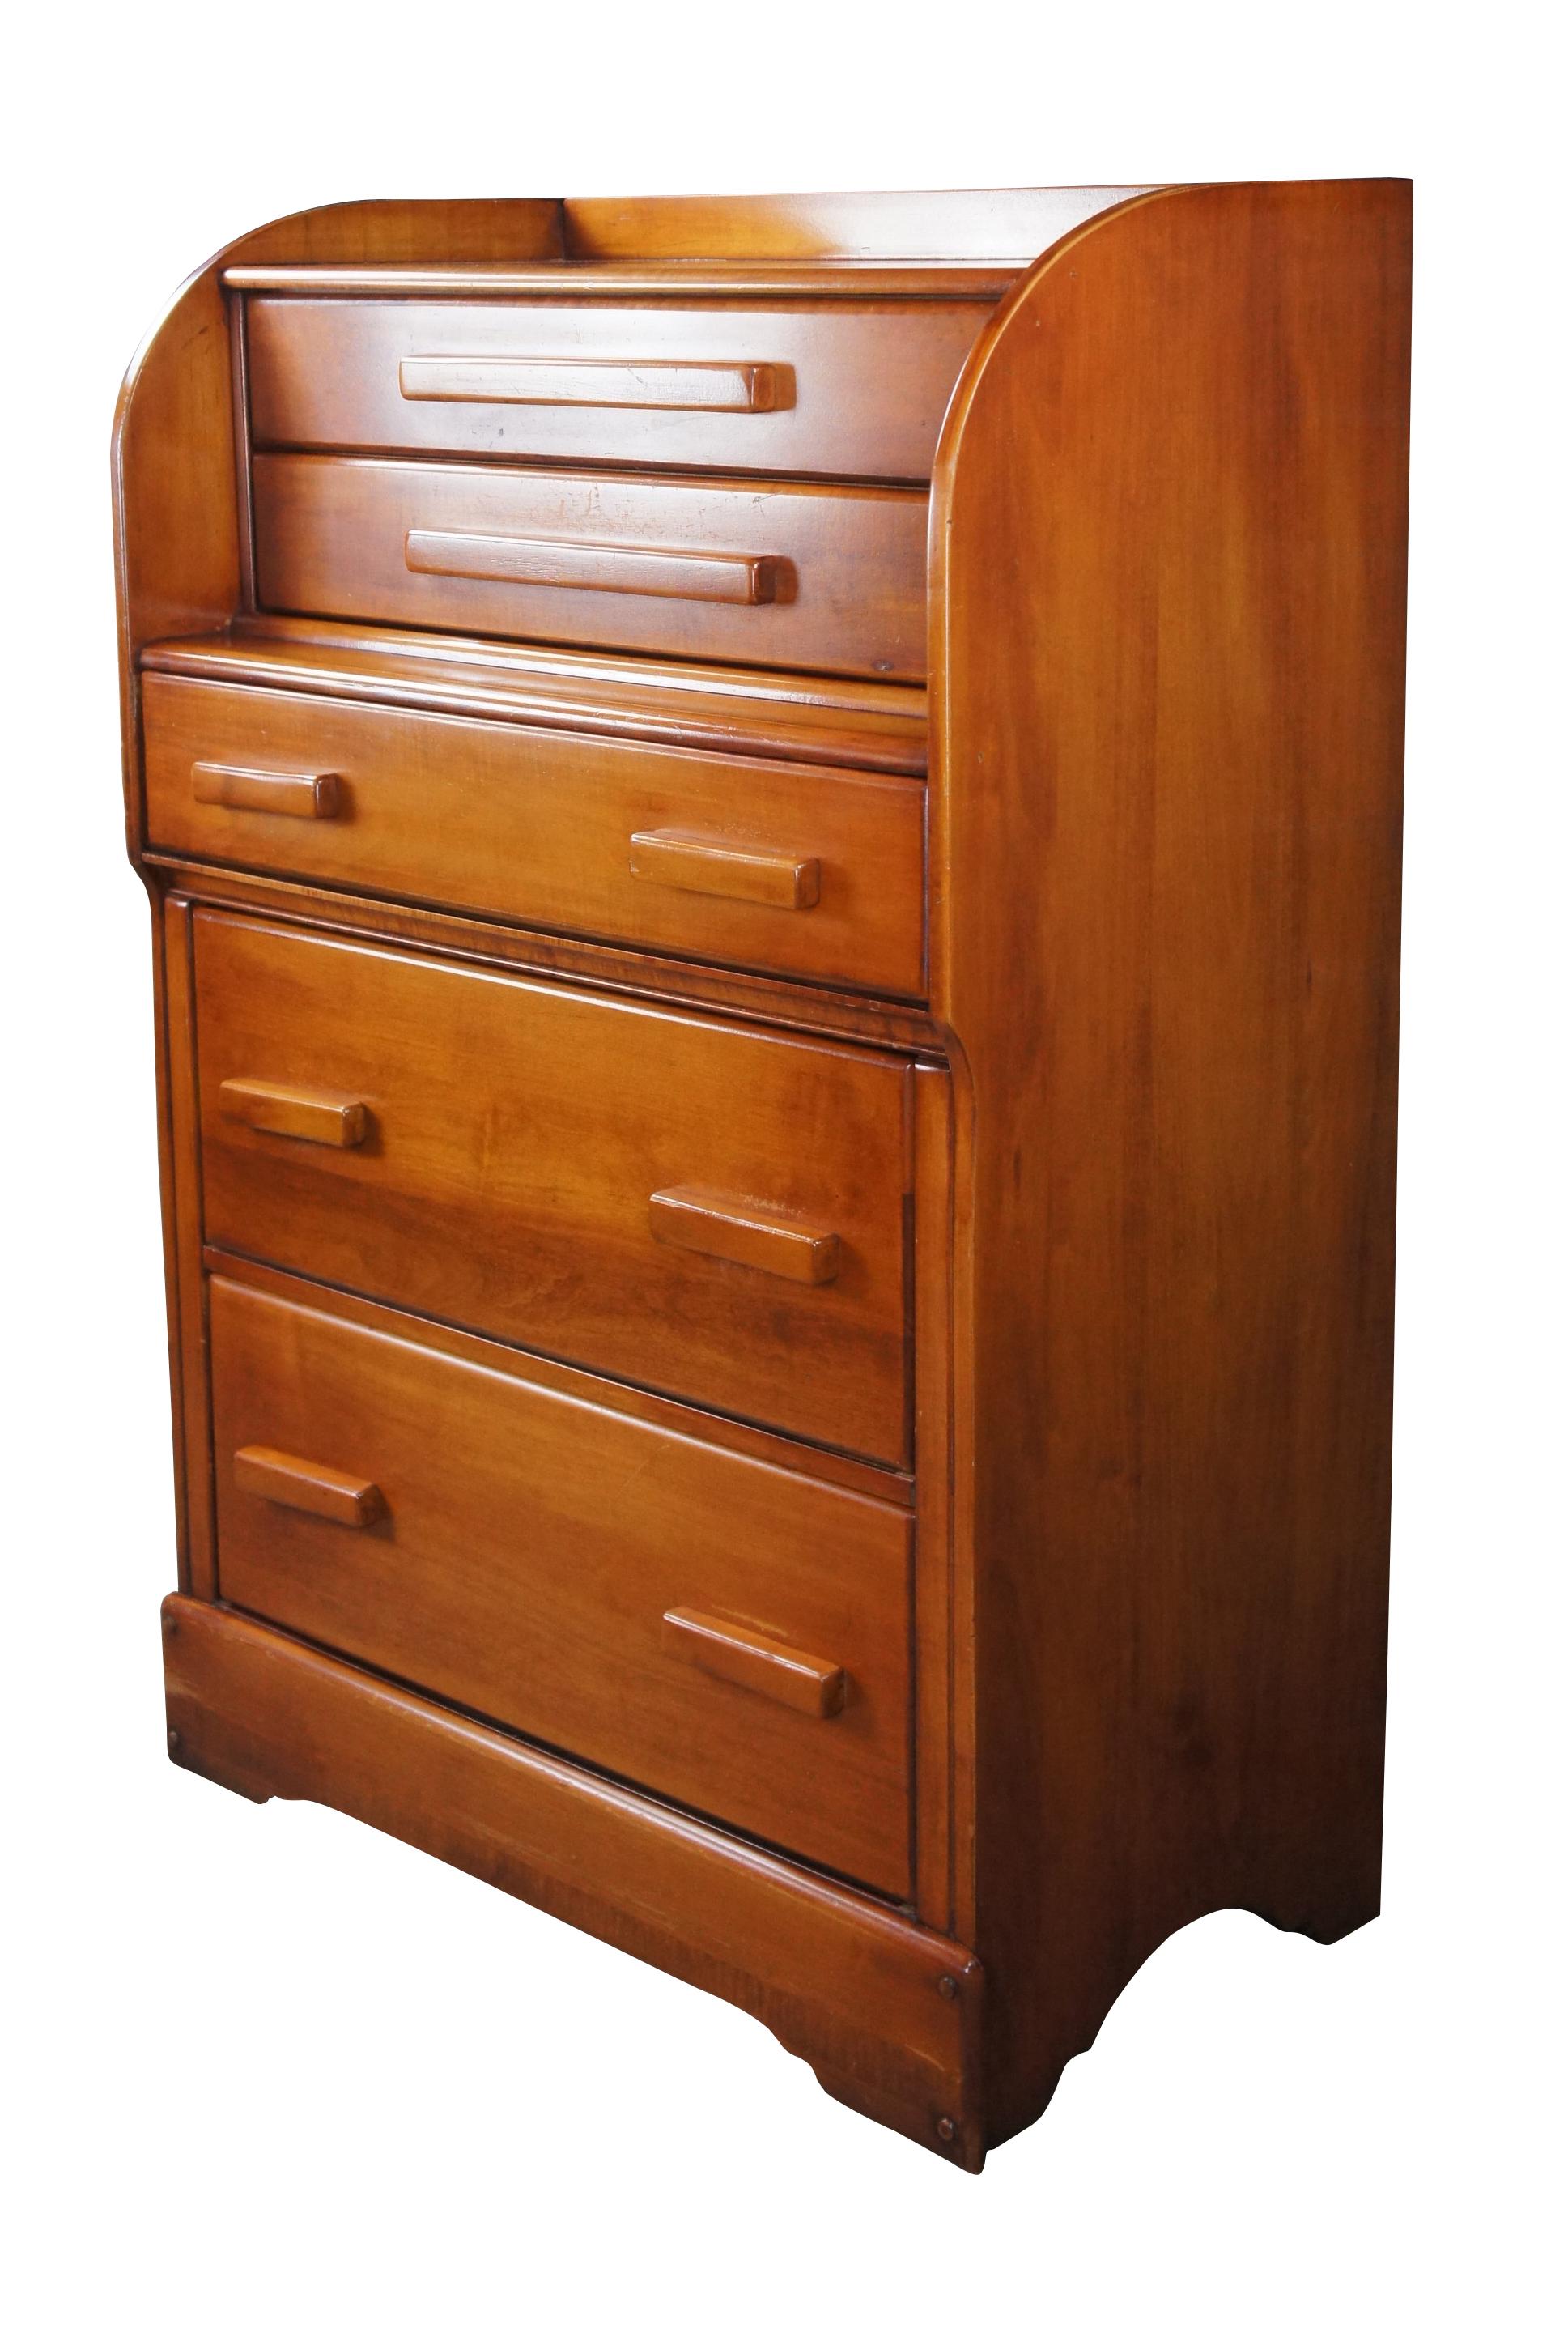 Mid-Century Modern tallboy dresser. Reminiscent of a secretary. Made from Maple with five dovetailed drawers and wooden handles. Attributed to Heywood Wakefield. Measure: 48